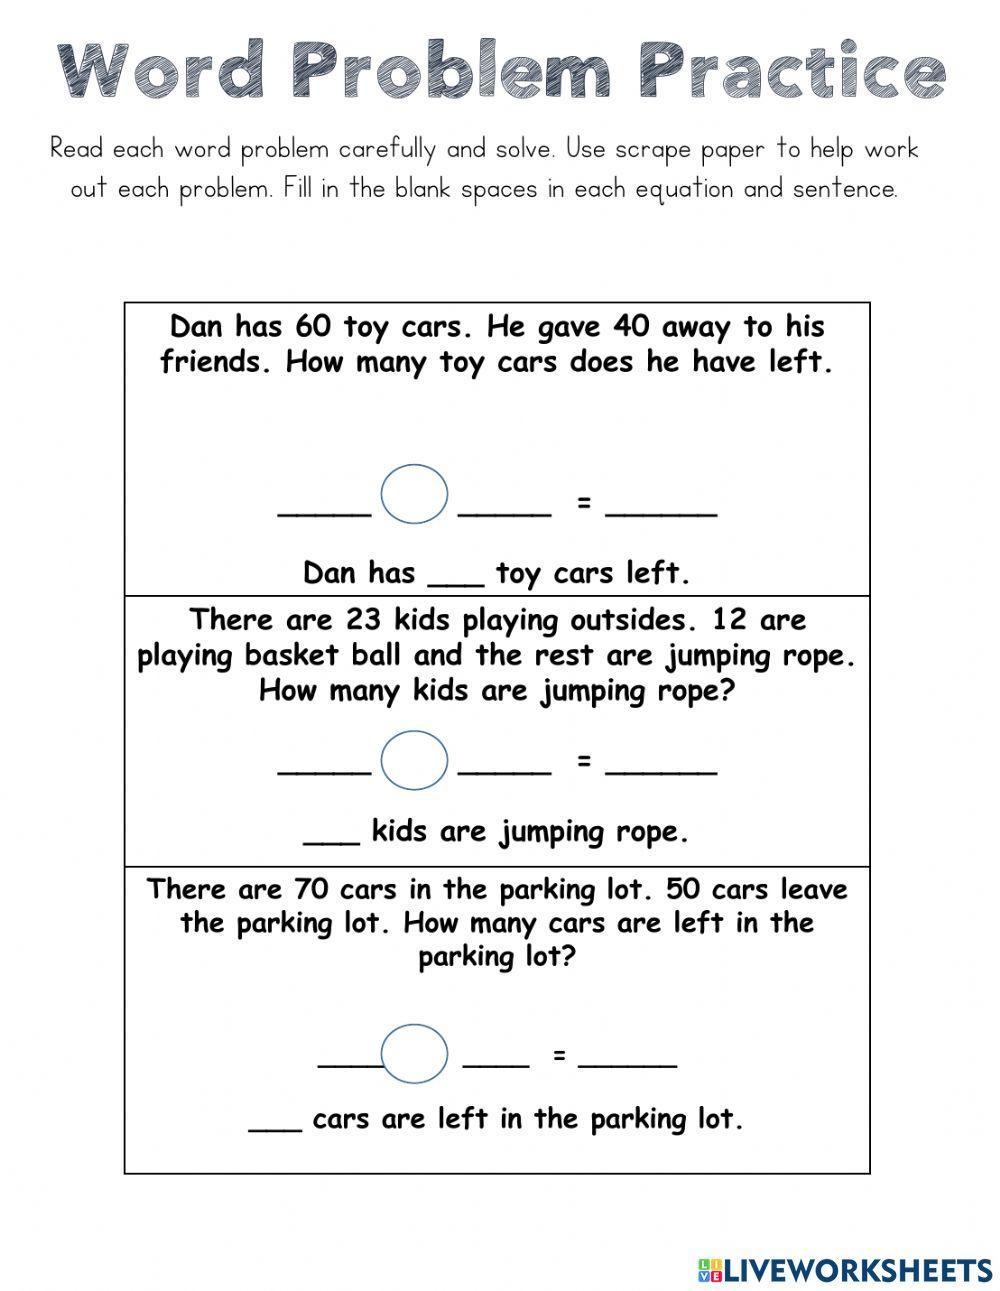 Word Problems 2